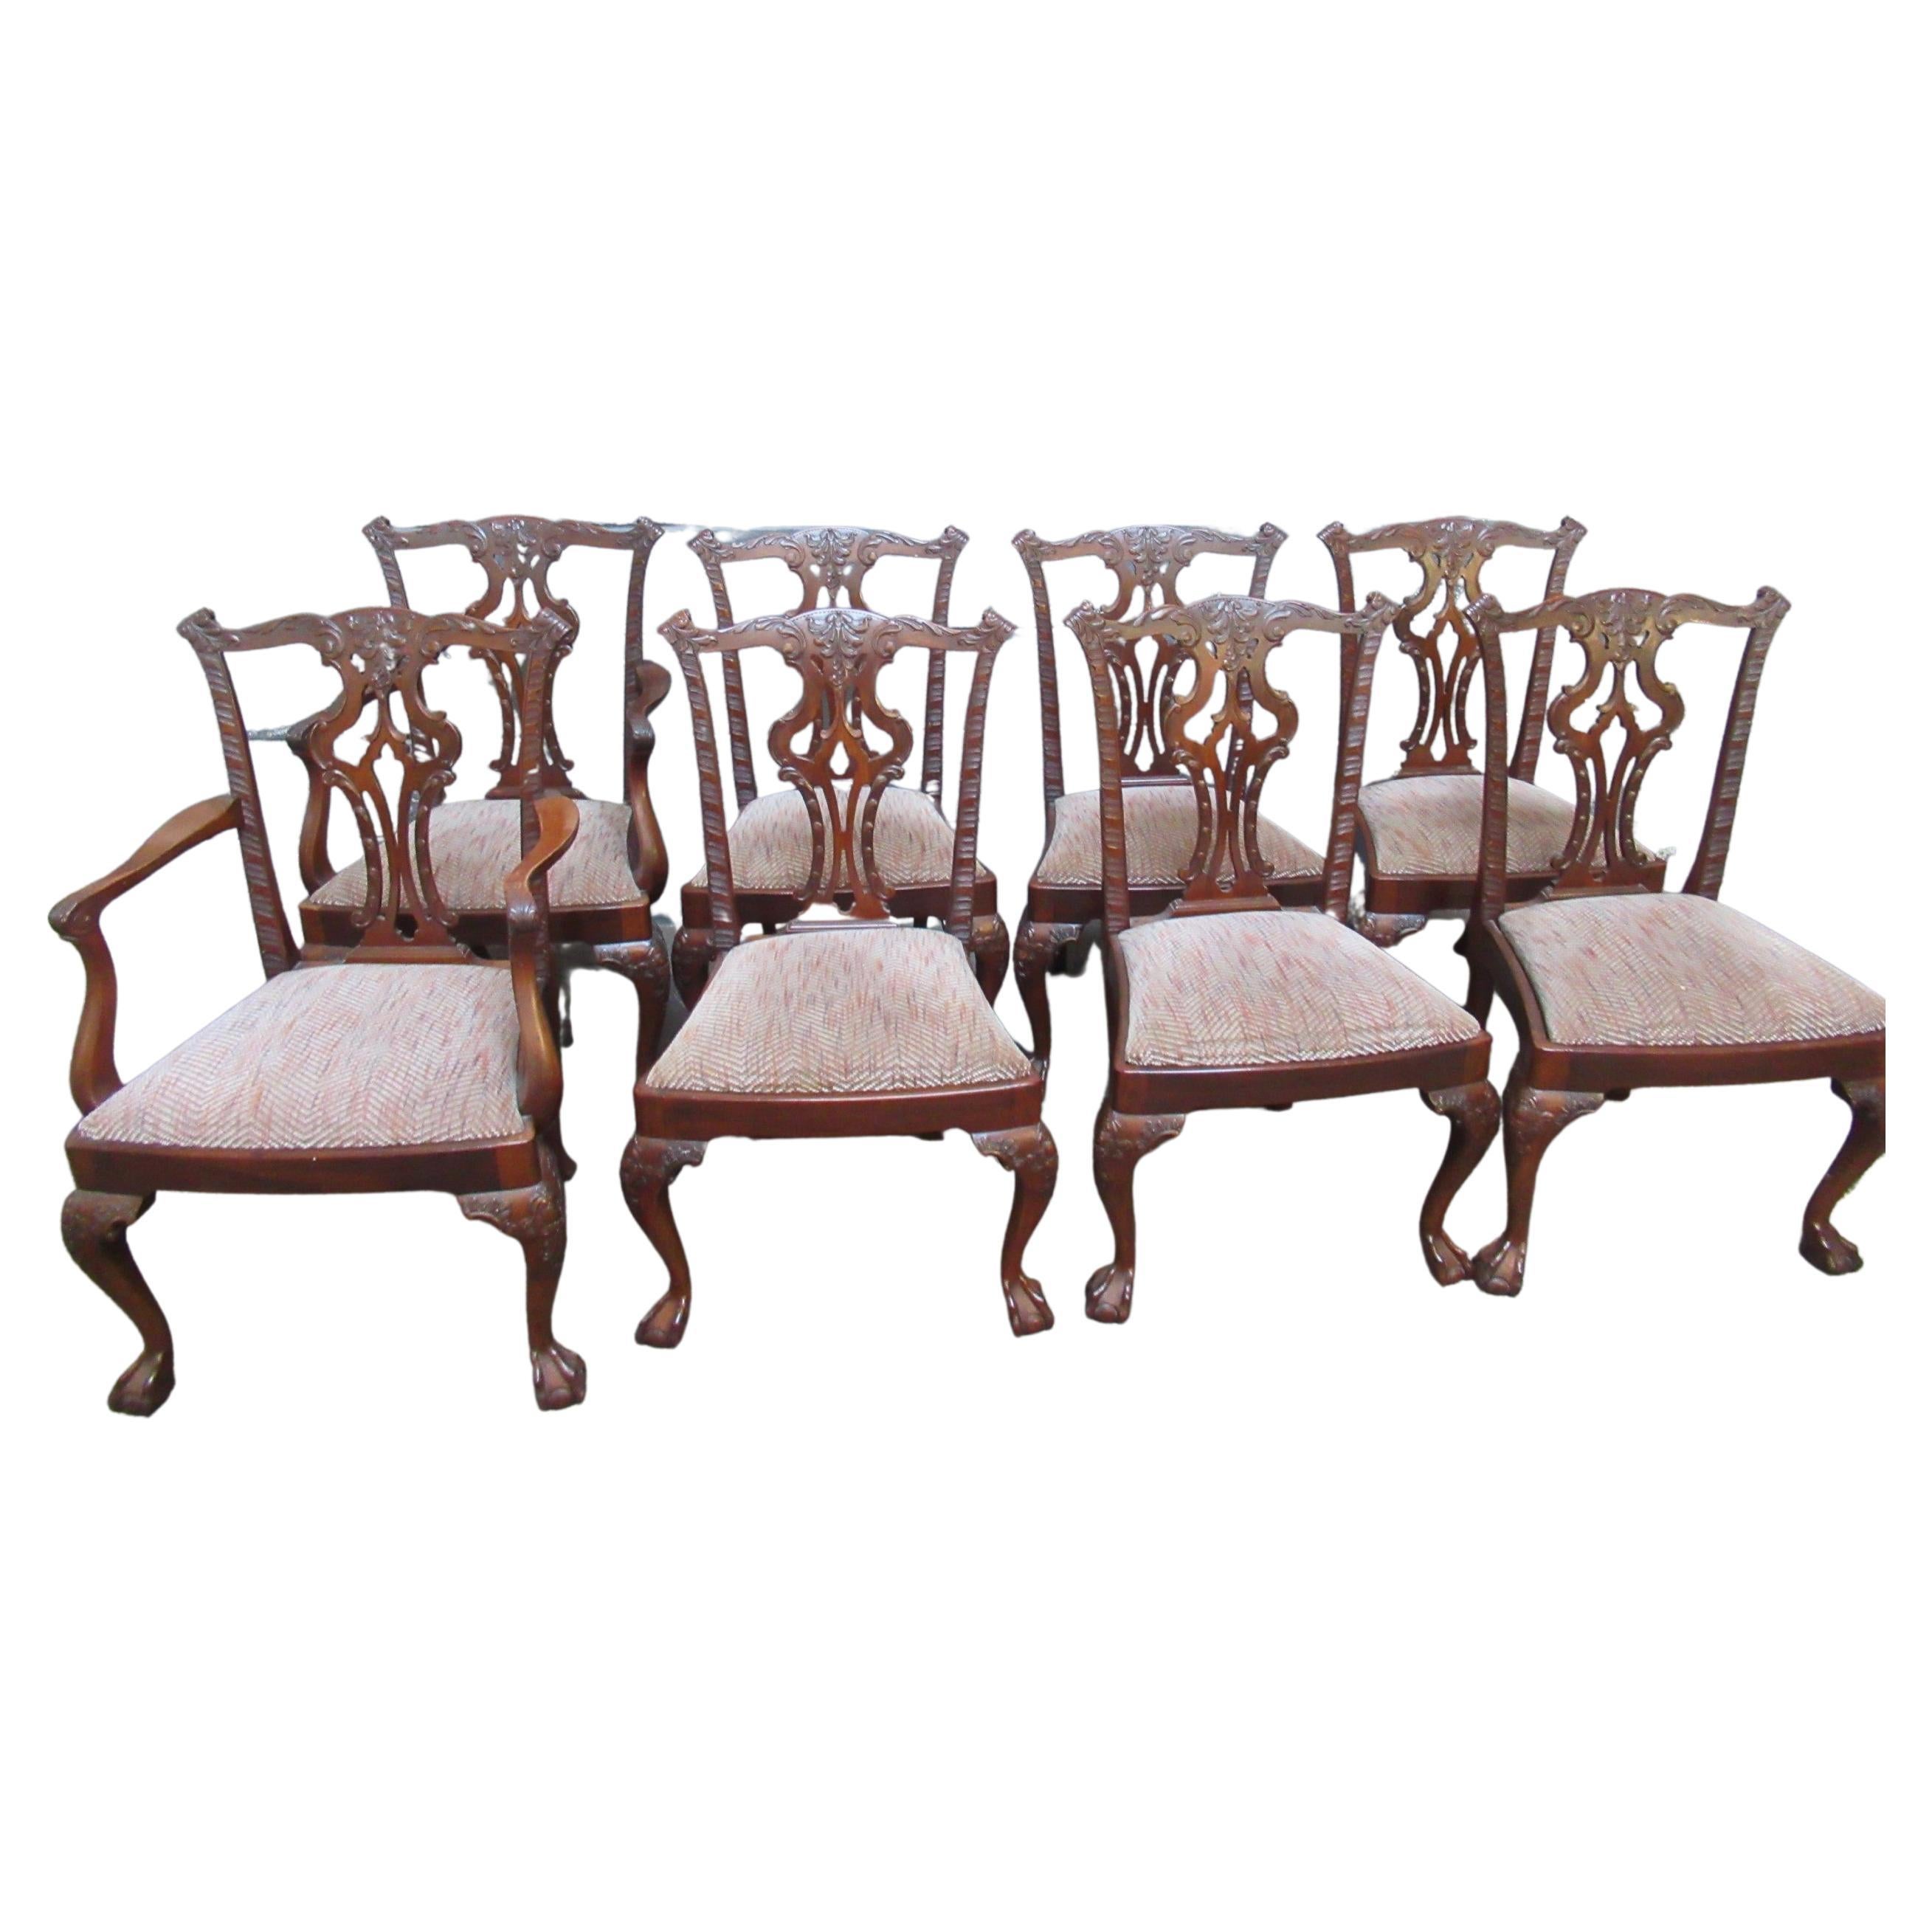 Superb Set of 8 (6+2) Antique English Carved Mahogany Chipp. Style Dining Chairs